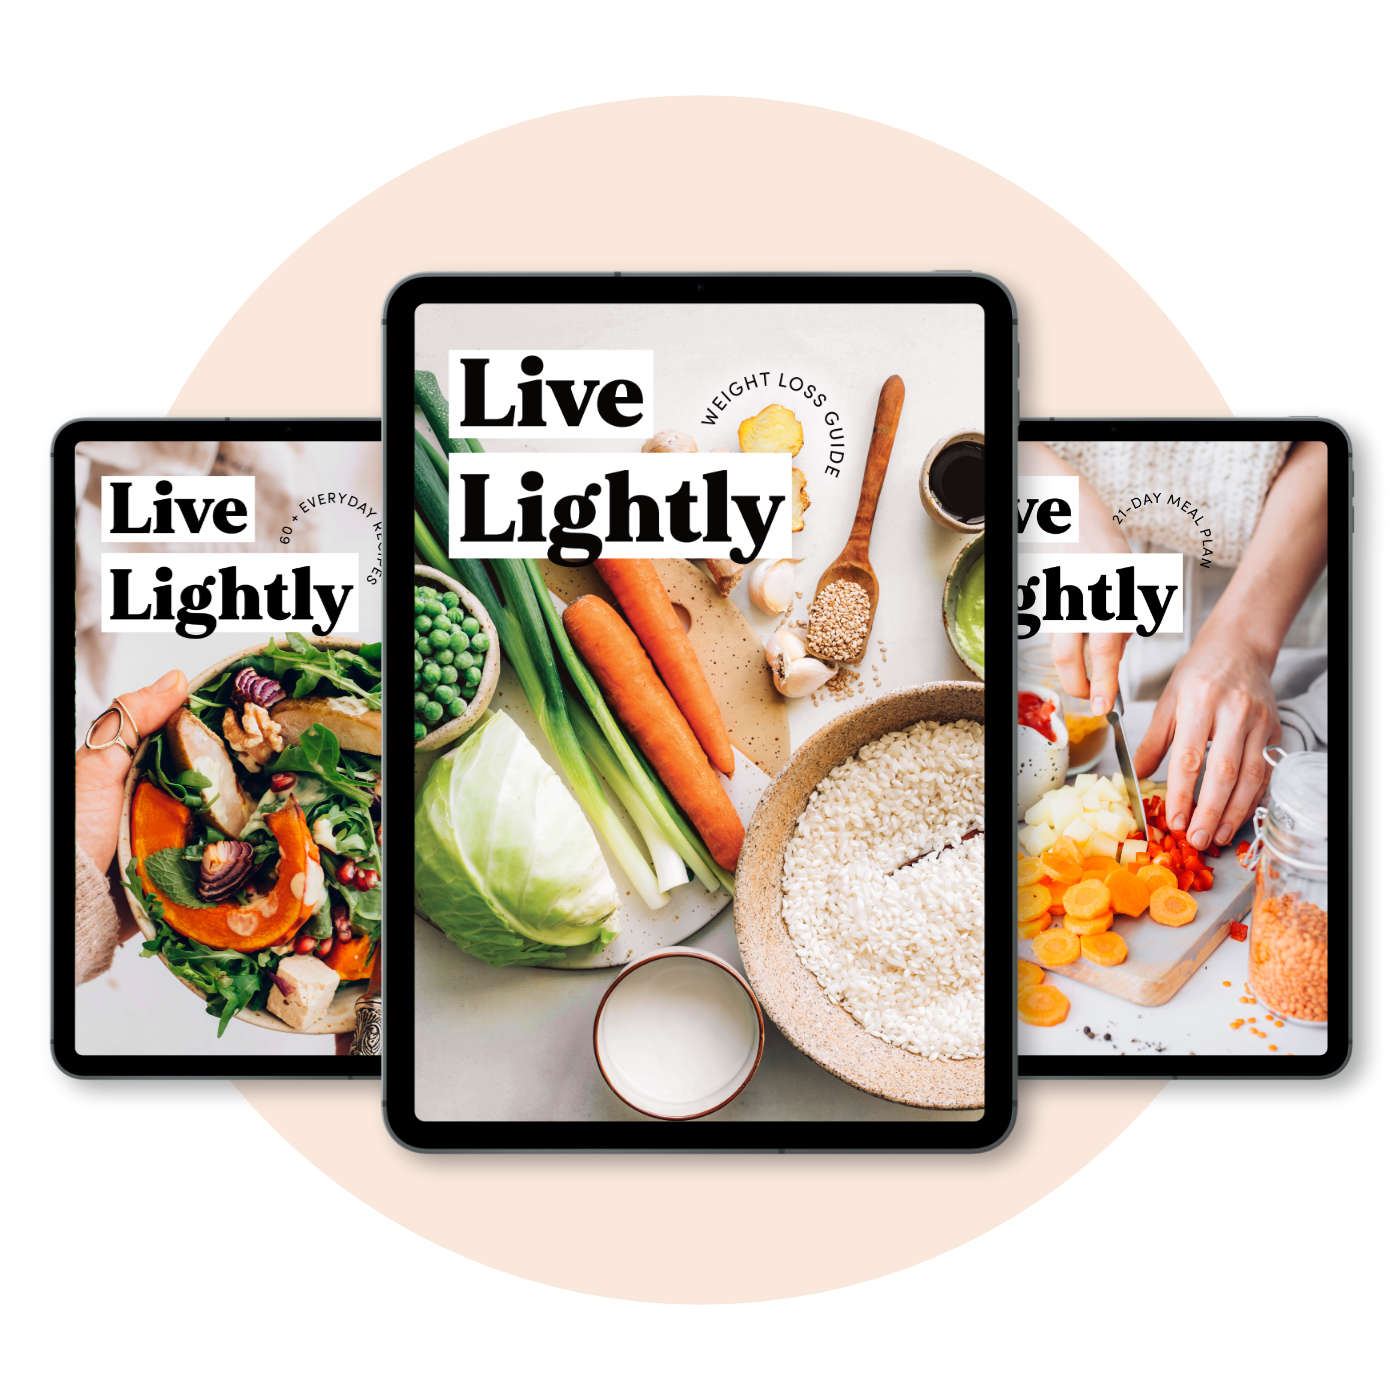 Three eBooks of Live Lightly showcased as iPads on a circle